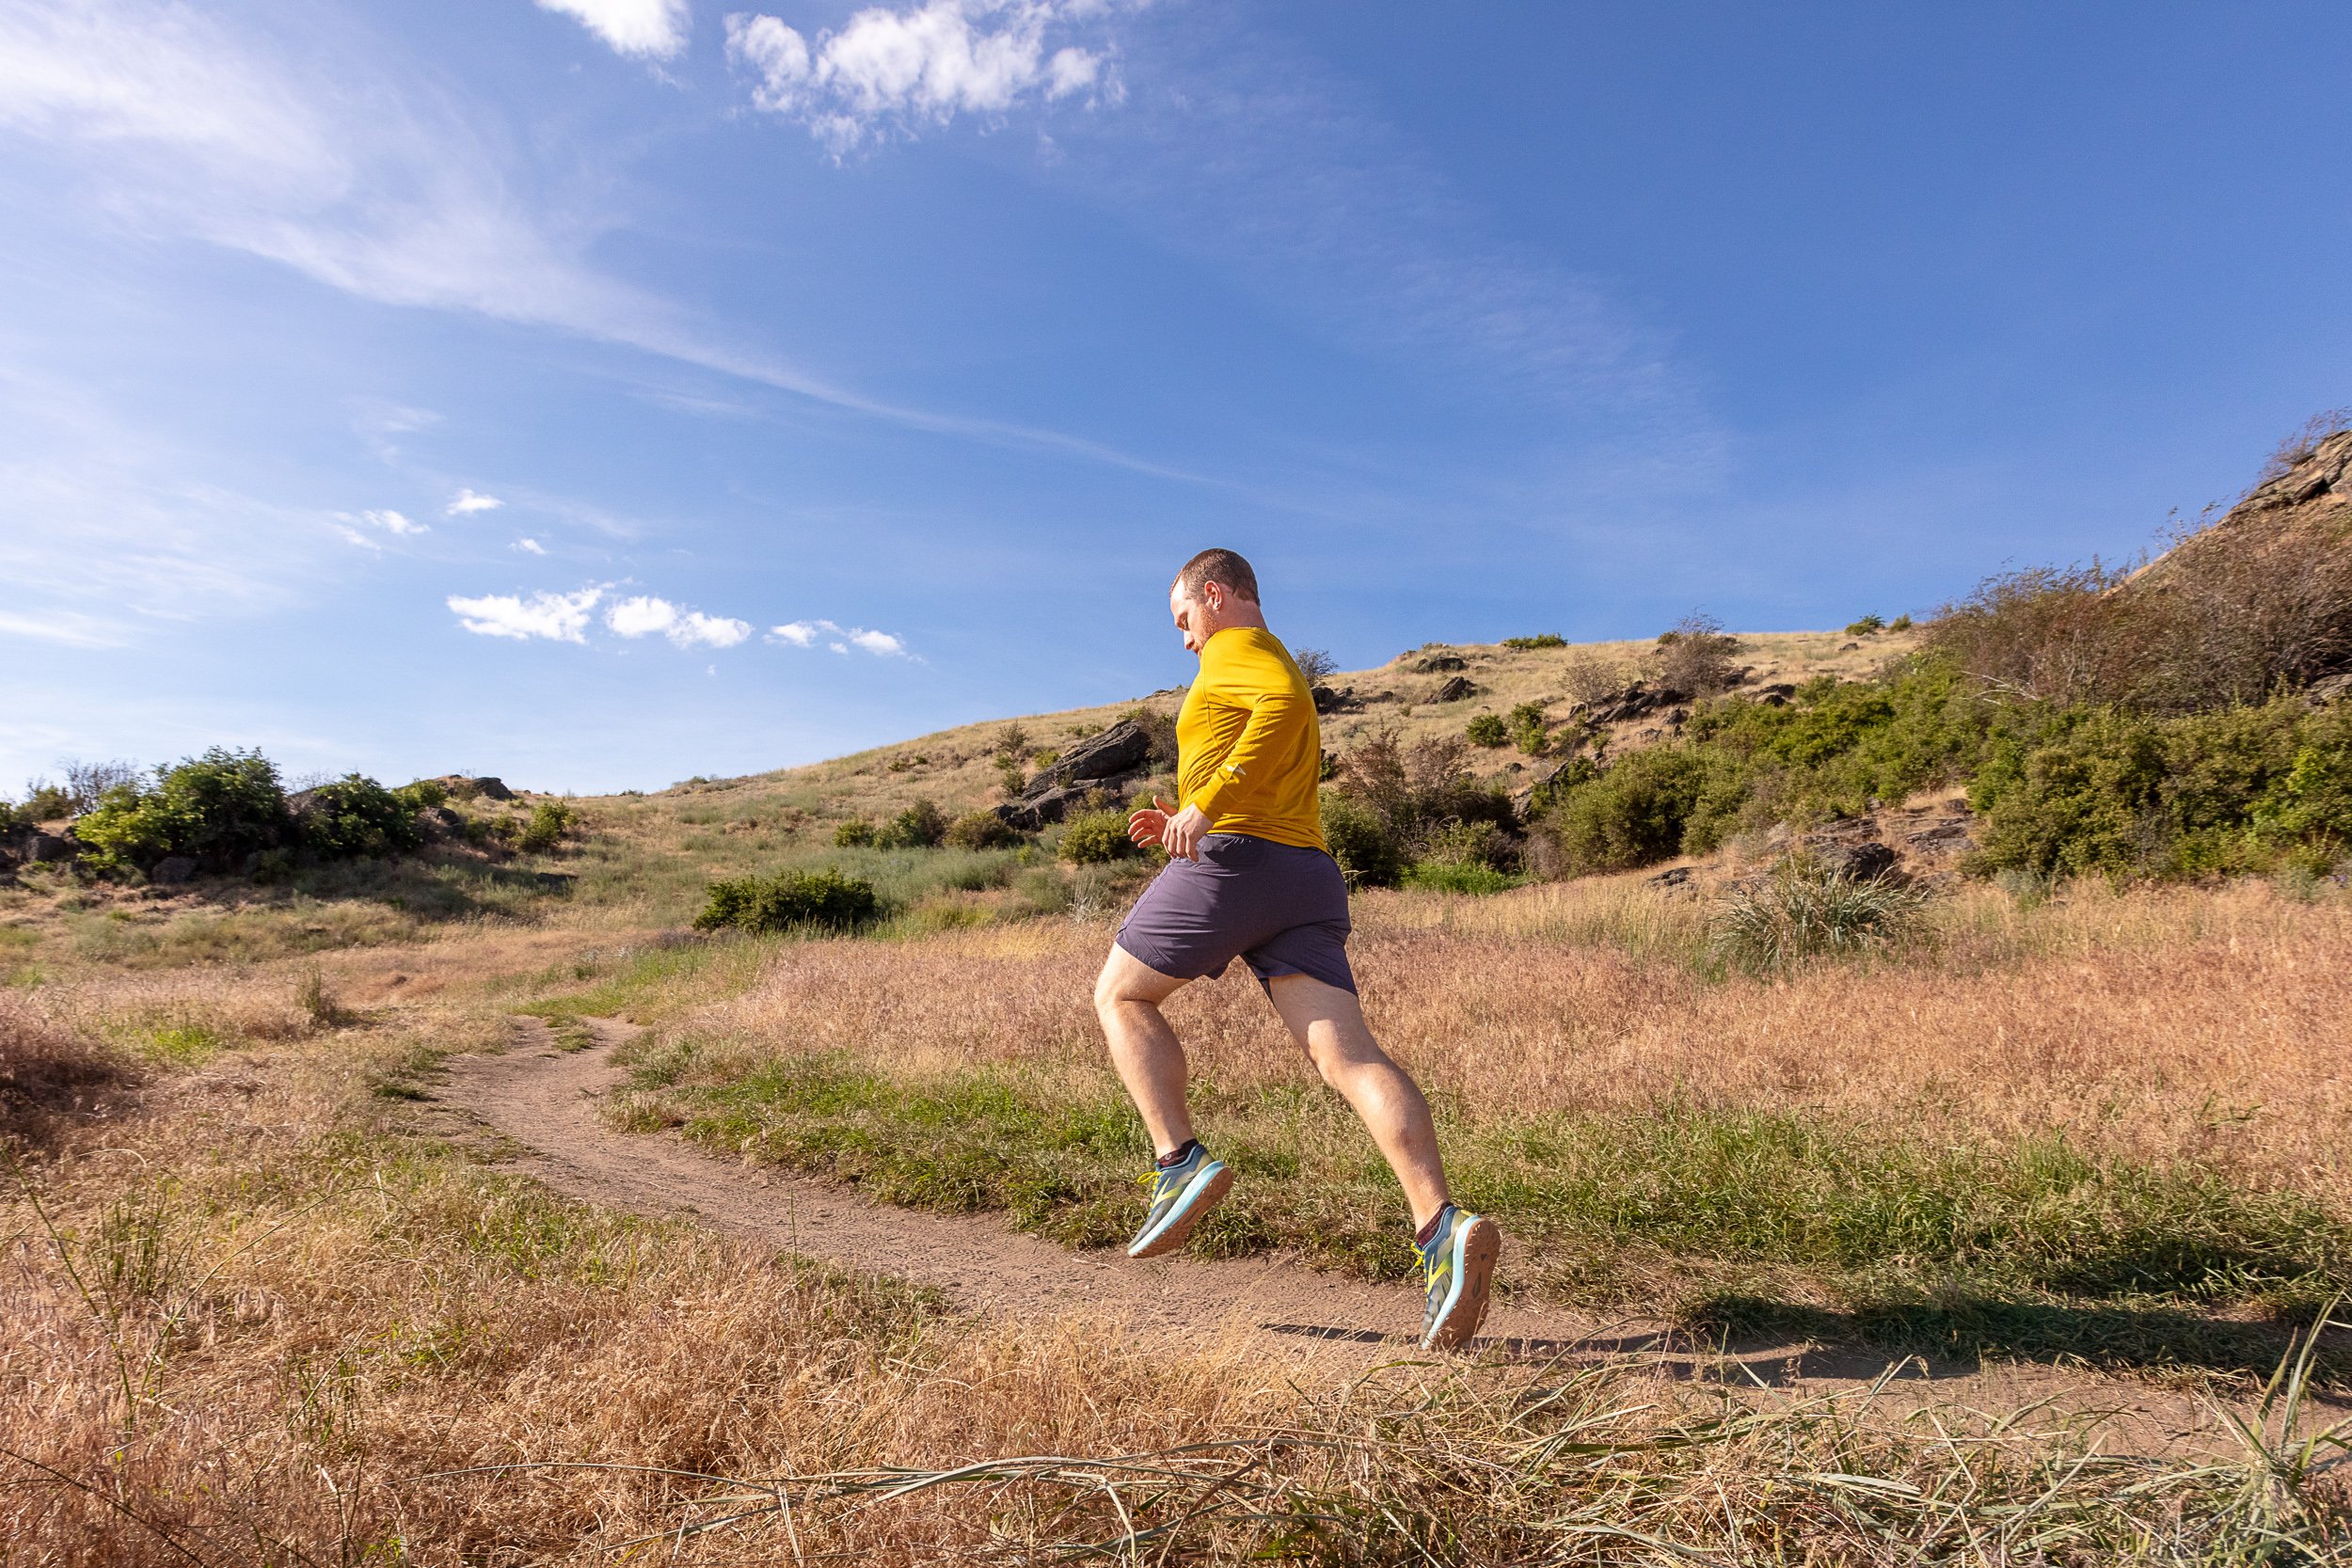 editorial photograph of runner on trails in eastern Washington.jpg